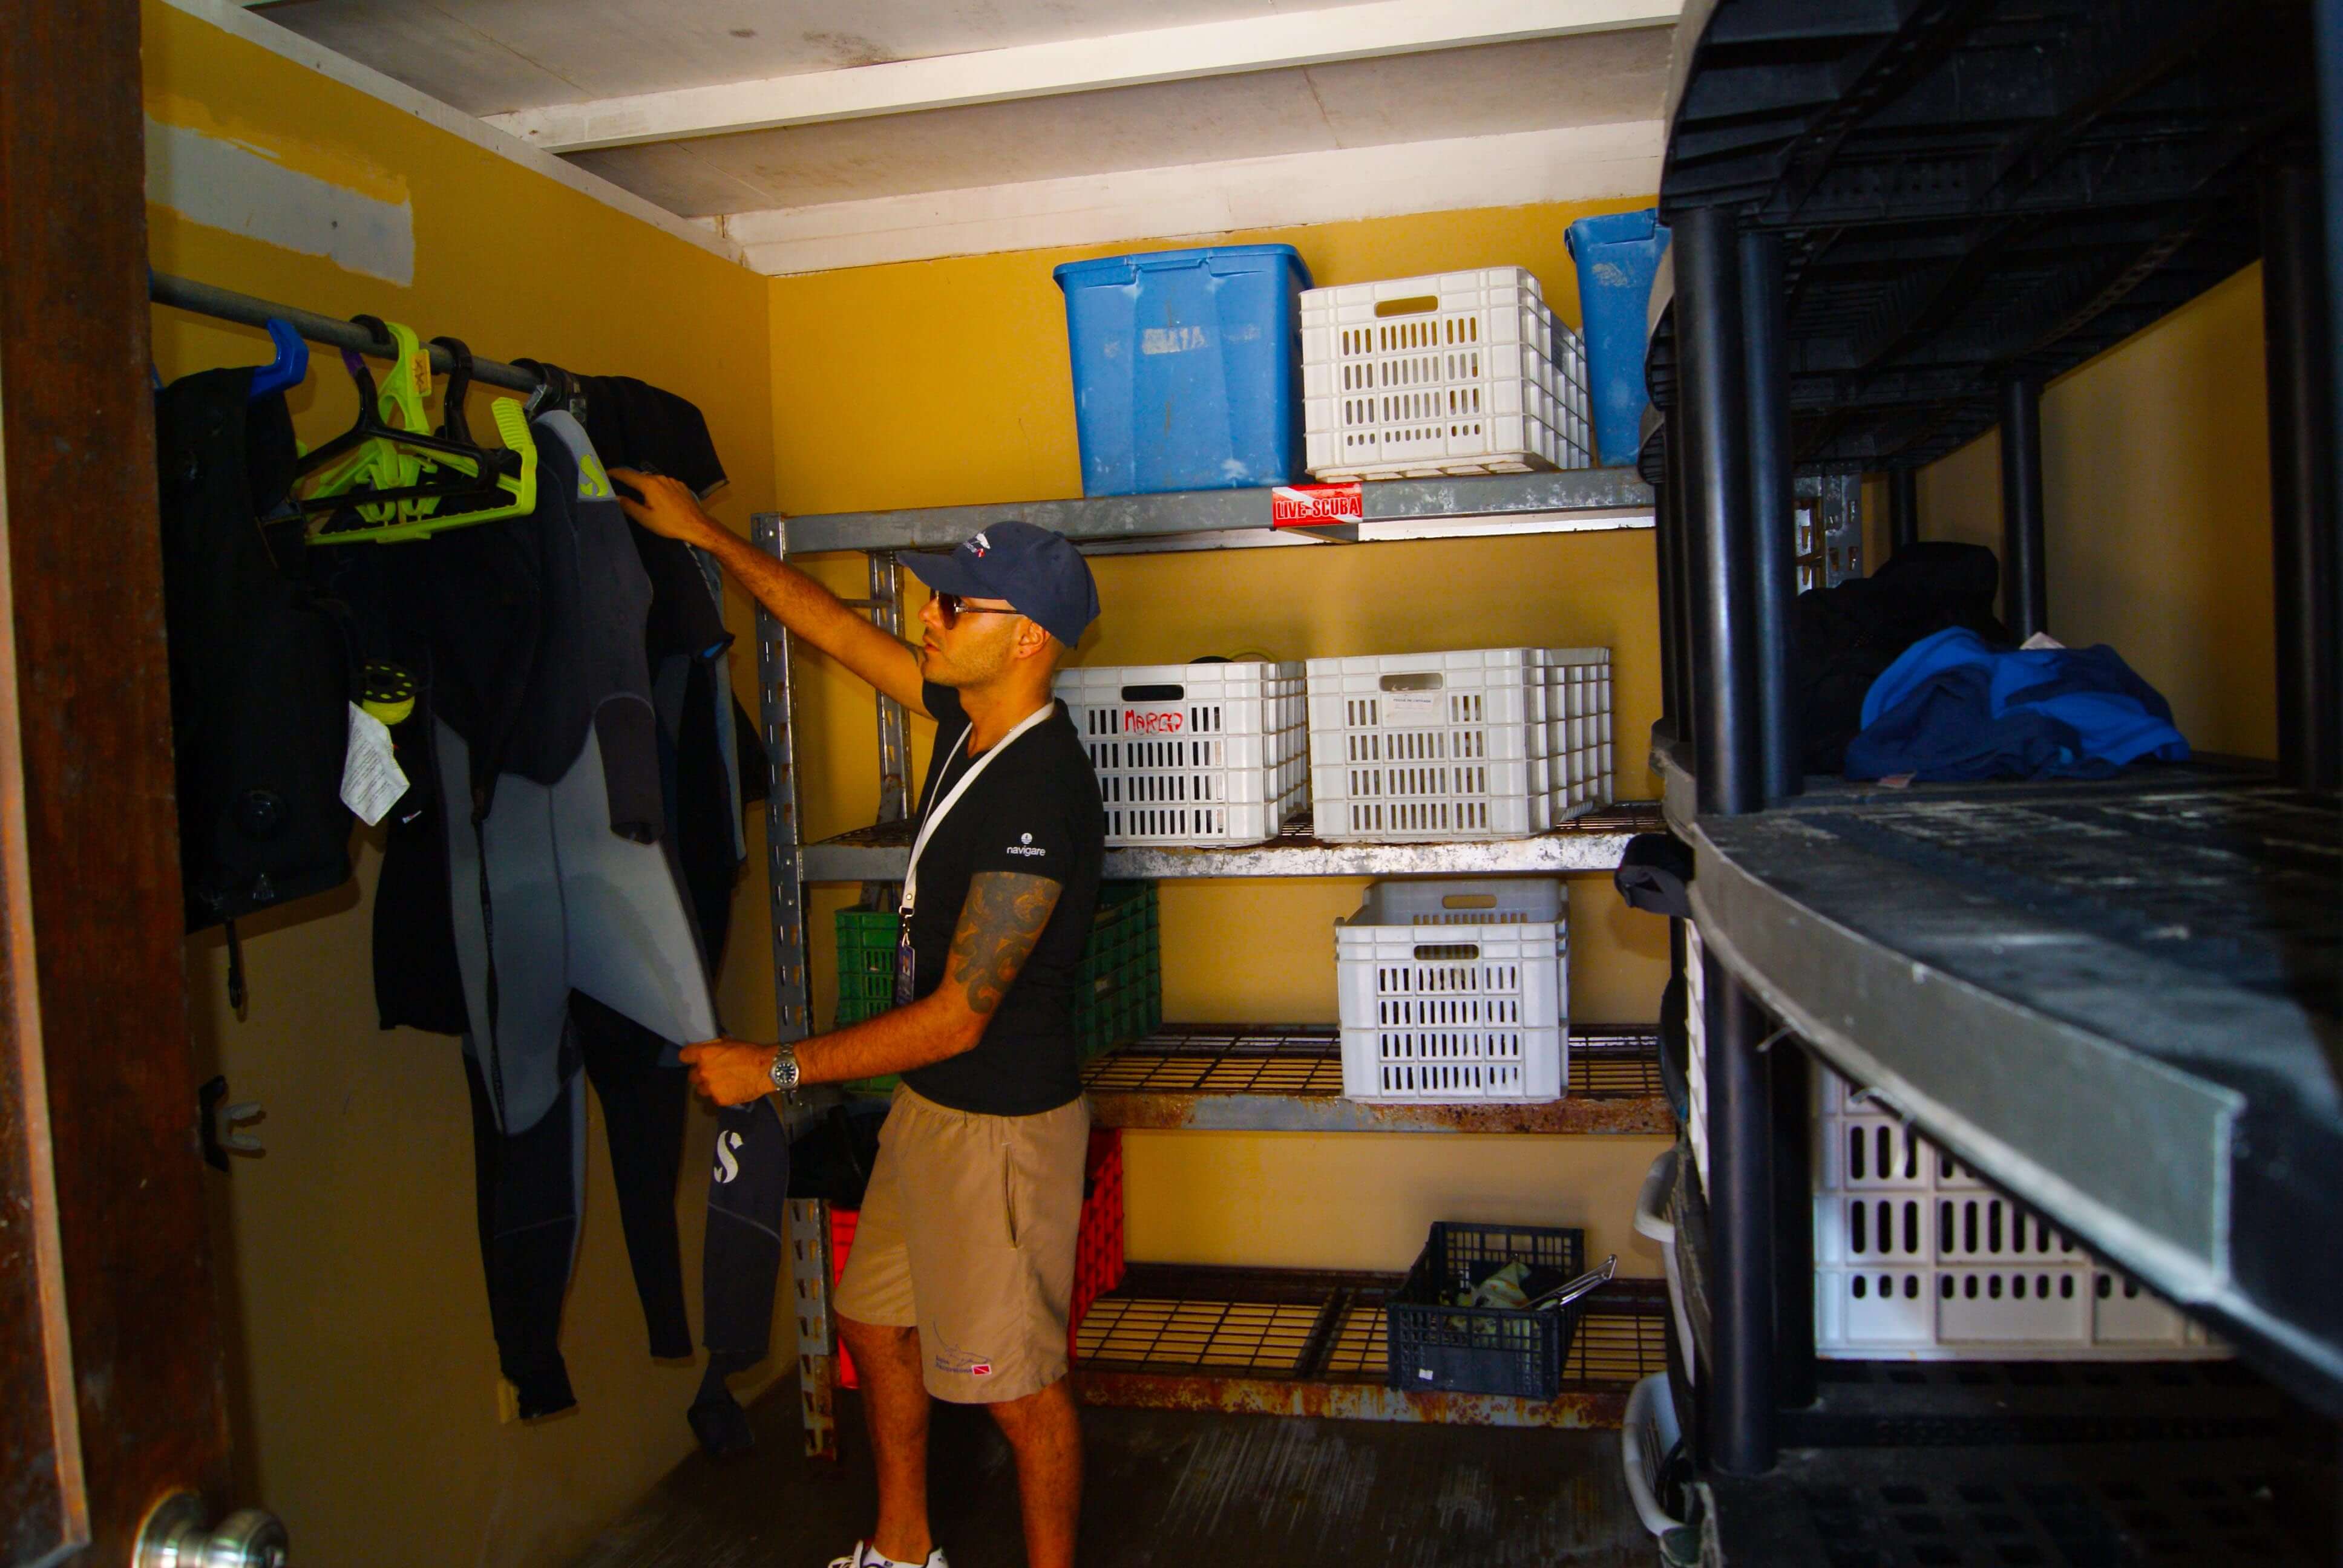 The storage room. If you bring your own equipment we will safely store it for you!